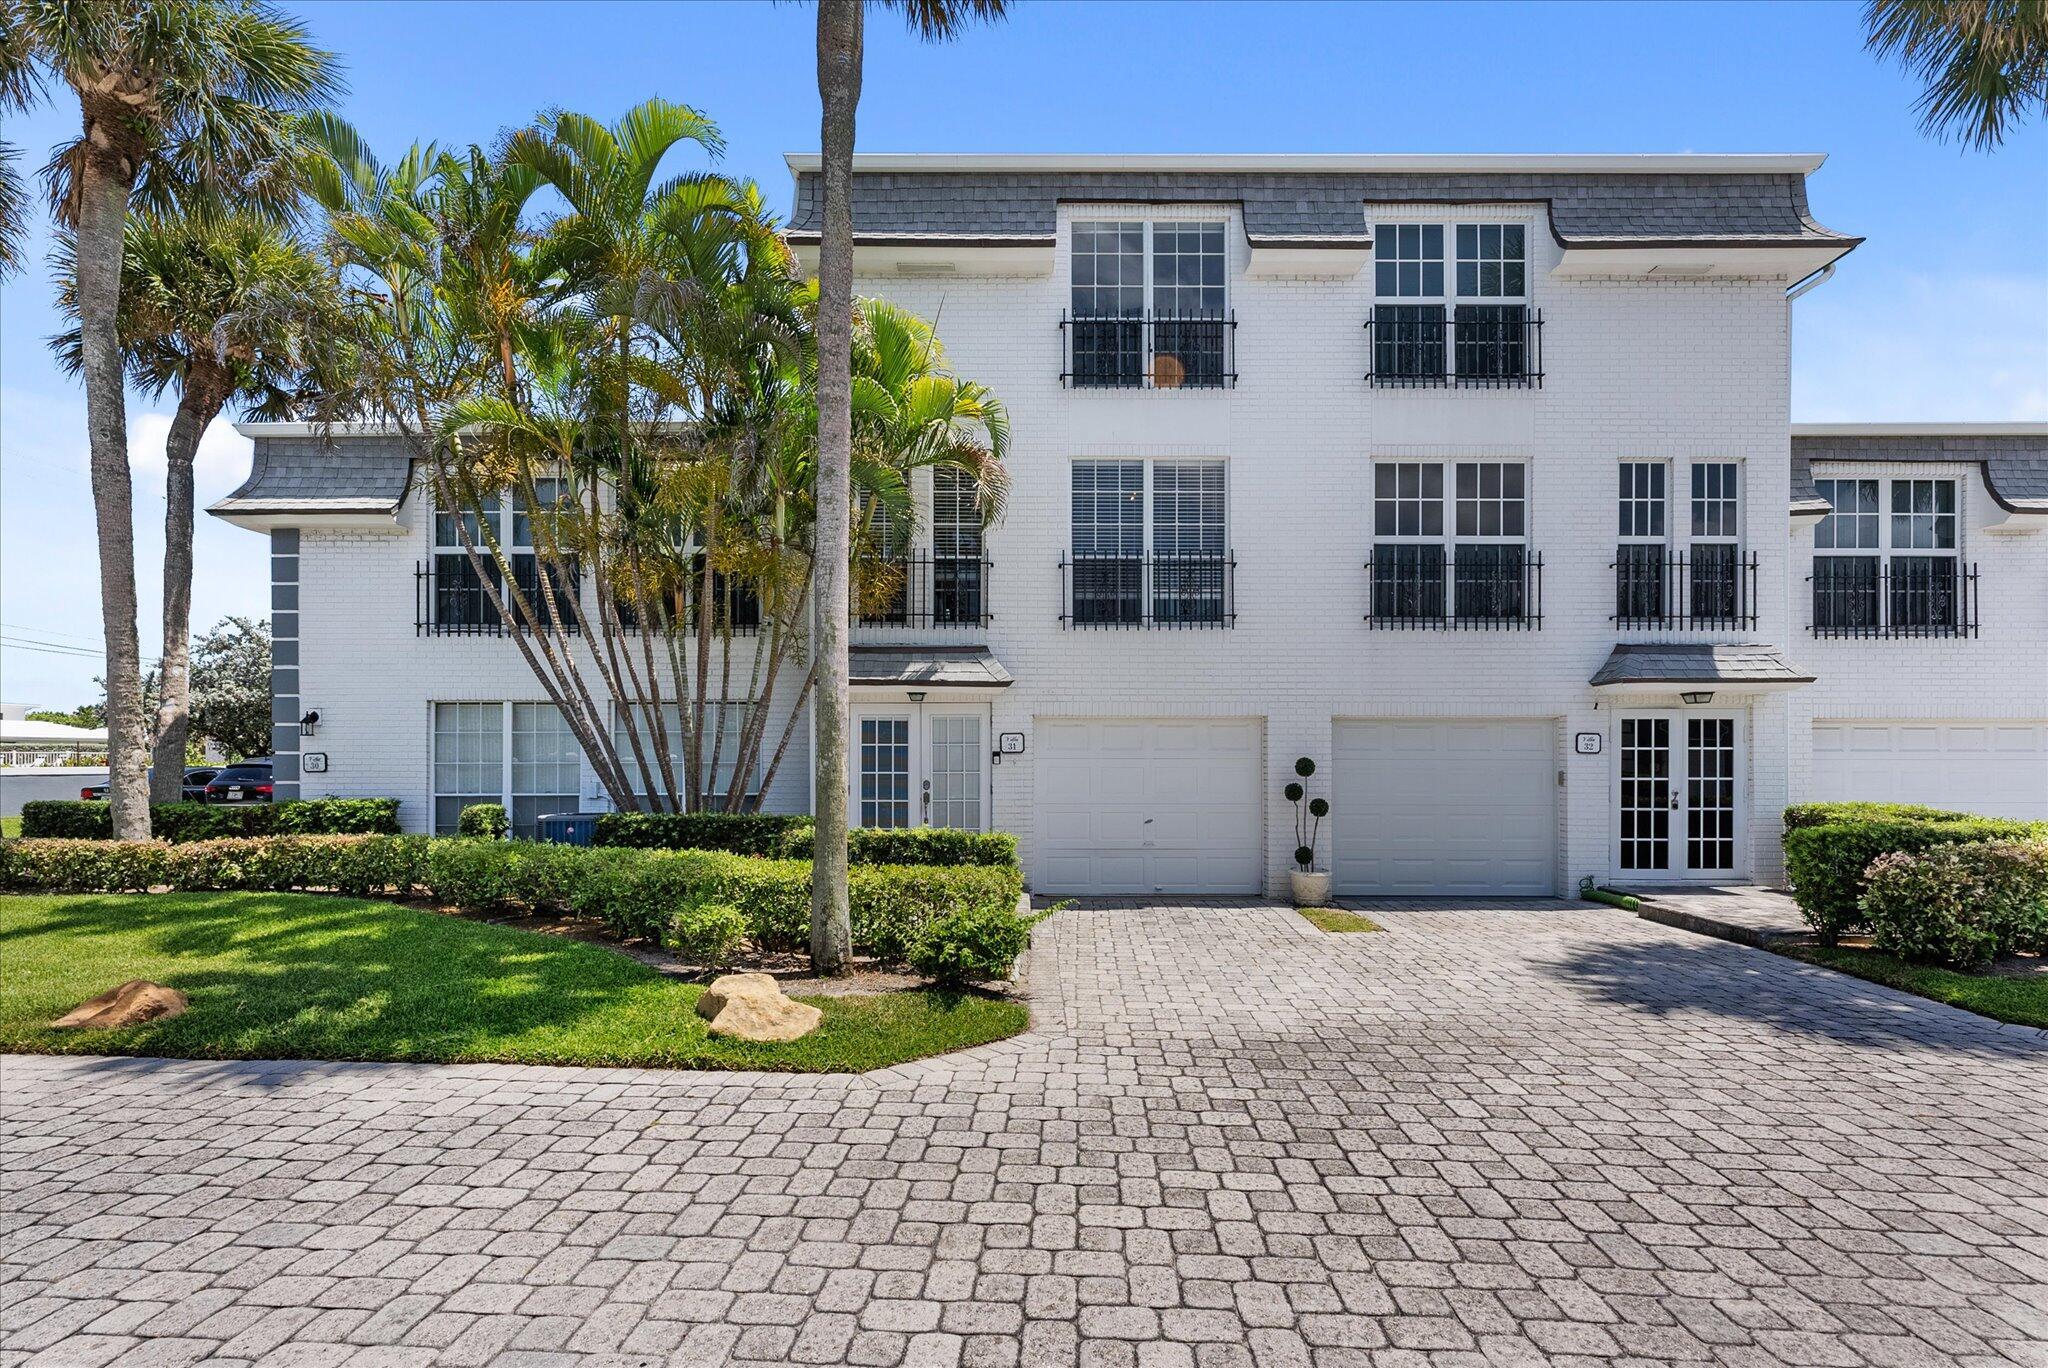 Located in prestigious Hillsboro Mile at the exclusive Hillsboro Beach and Yacht Club, this beautifully maintained three story townhome with attached one car garage is not to be missed! Remodeled kitchen with stainless steel appliances. Third floor consists of two primary bedrooms & baths w/walk-in closets. Second floor has expansive living area with a formal dining room, bathroom, and large eat-in kitchen. First floor has a large private room forguest/office/theatre with bathroom/shower and sliding glass doors to covered patio. Plantation shutters throughout. Community offers access to private beach!, tranquil pool, hot tub, & tennis court. Boat dockage available with access to Intracoastal. Come and wake up everyday in a vacation!